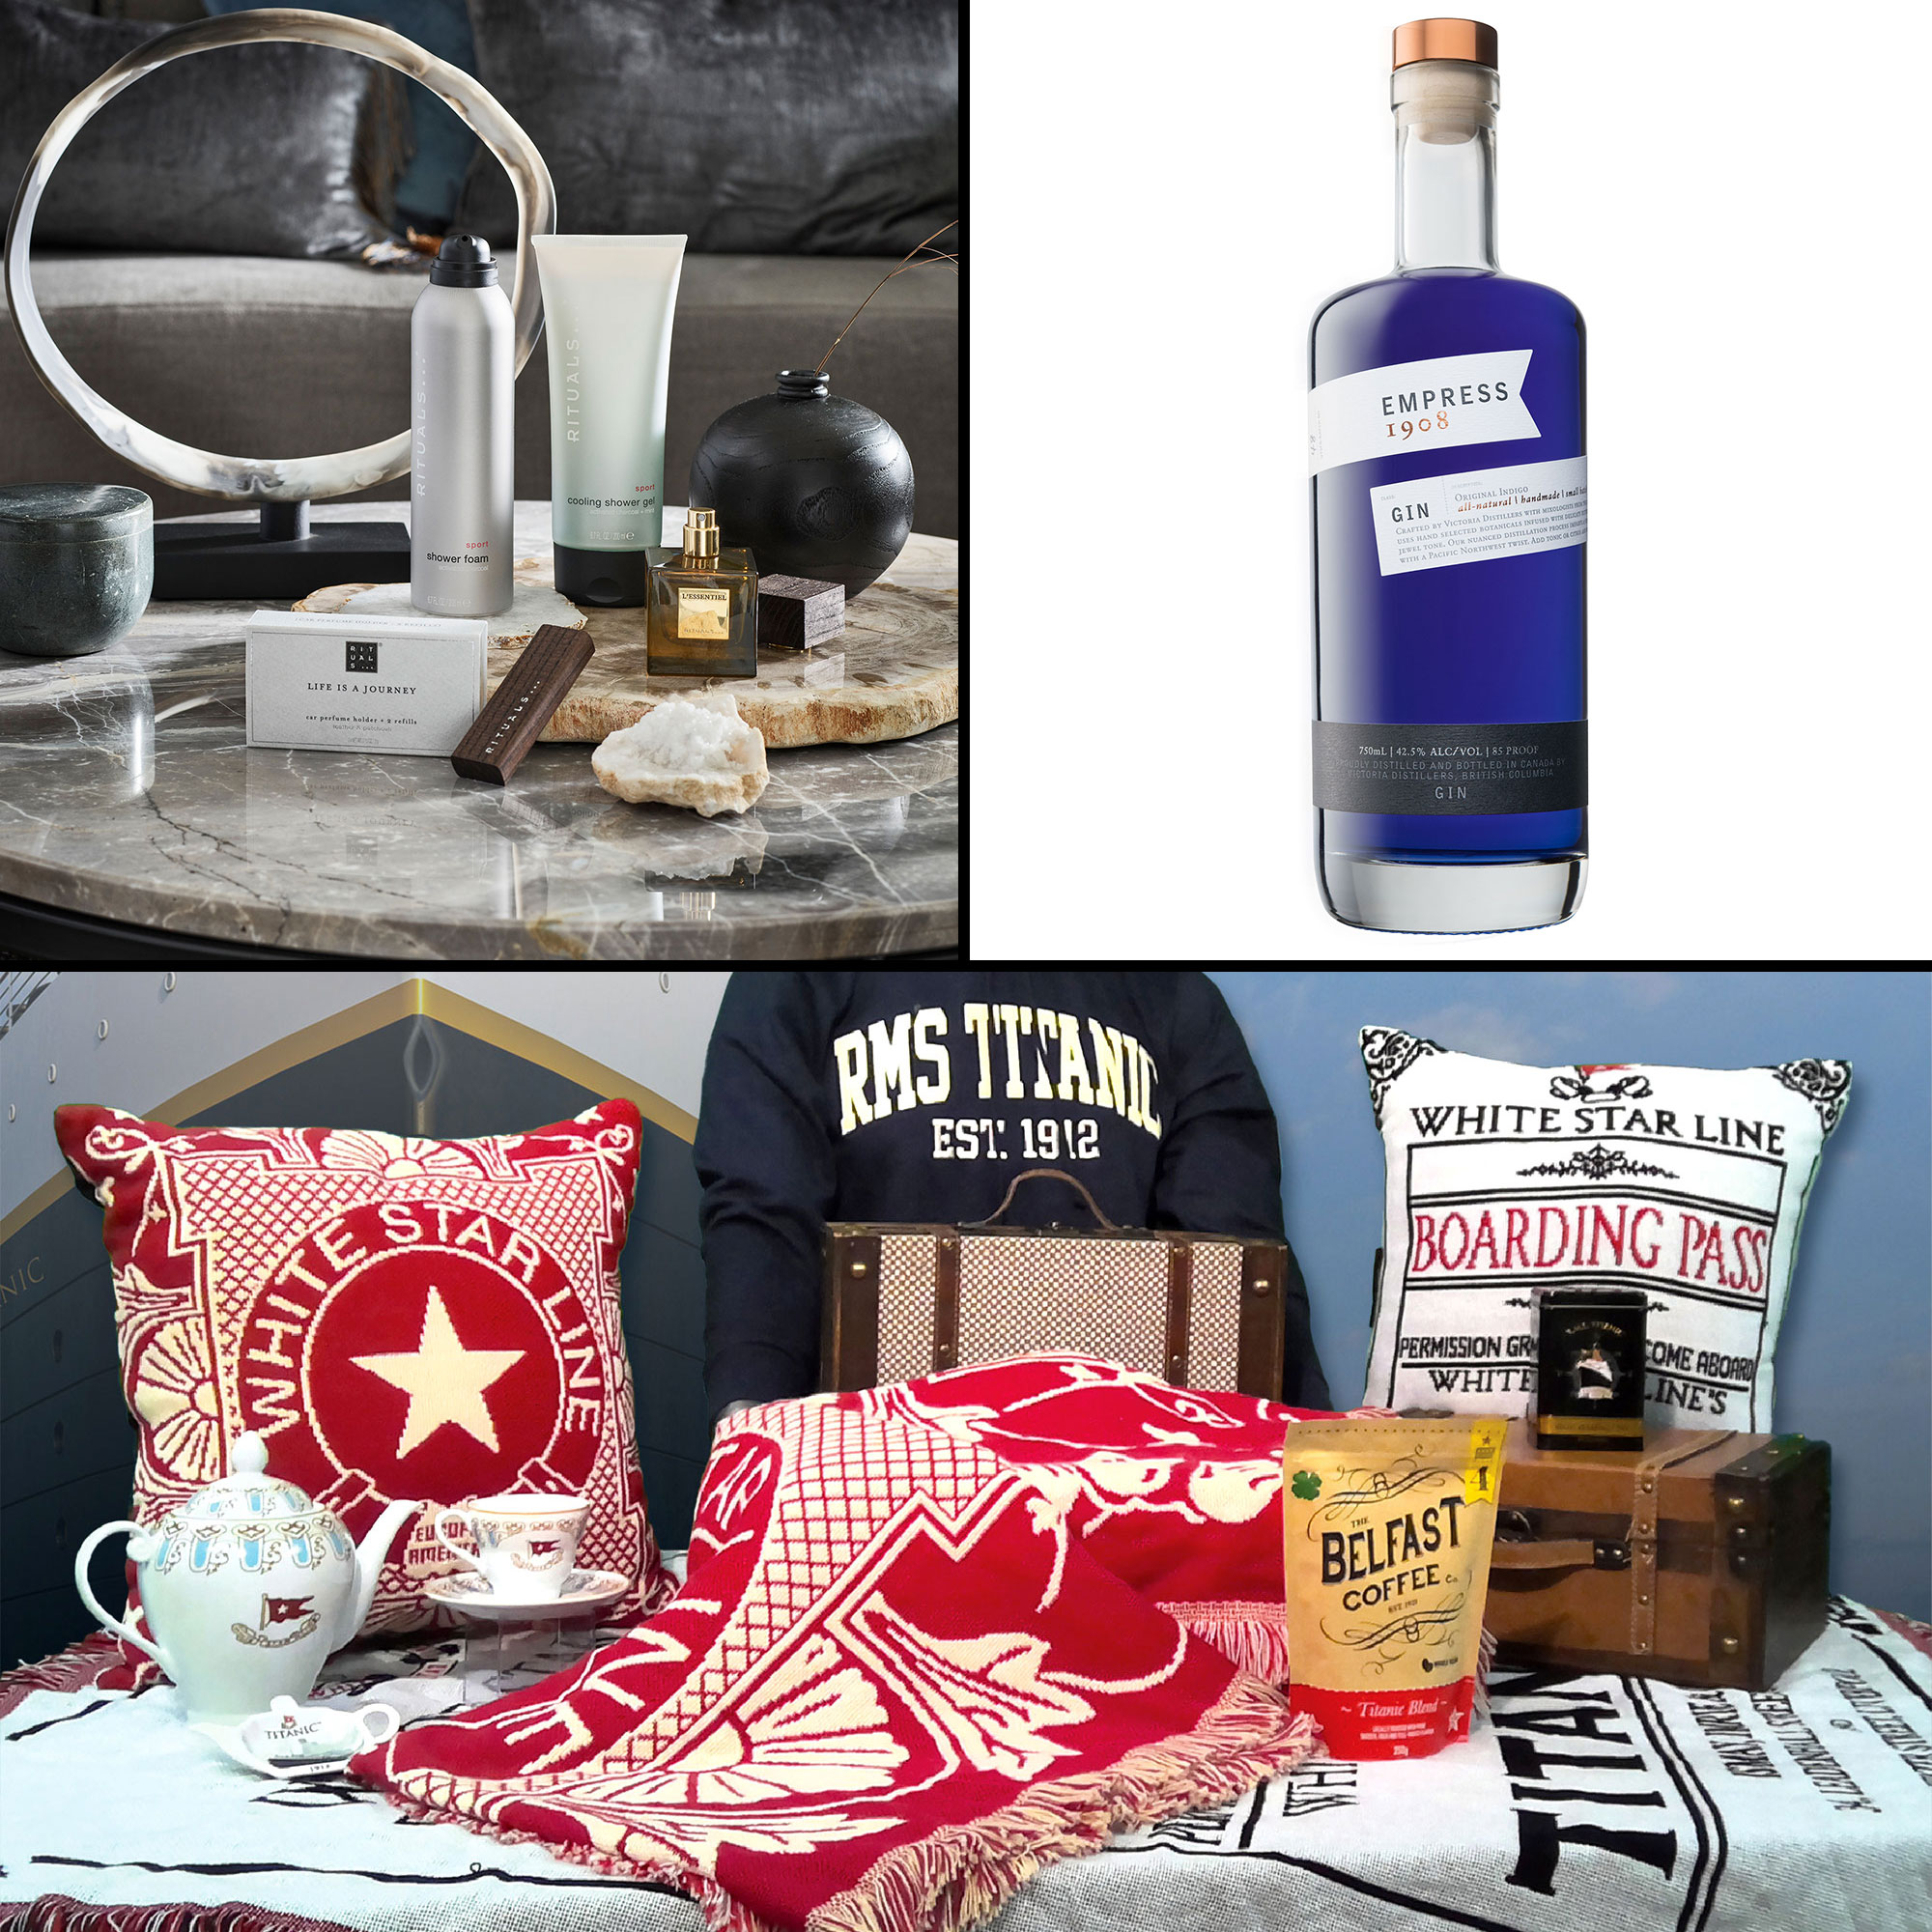 Buzzzz-o-meter: Empress 1908 Gin, the Titanic Store and More